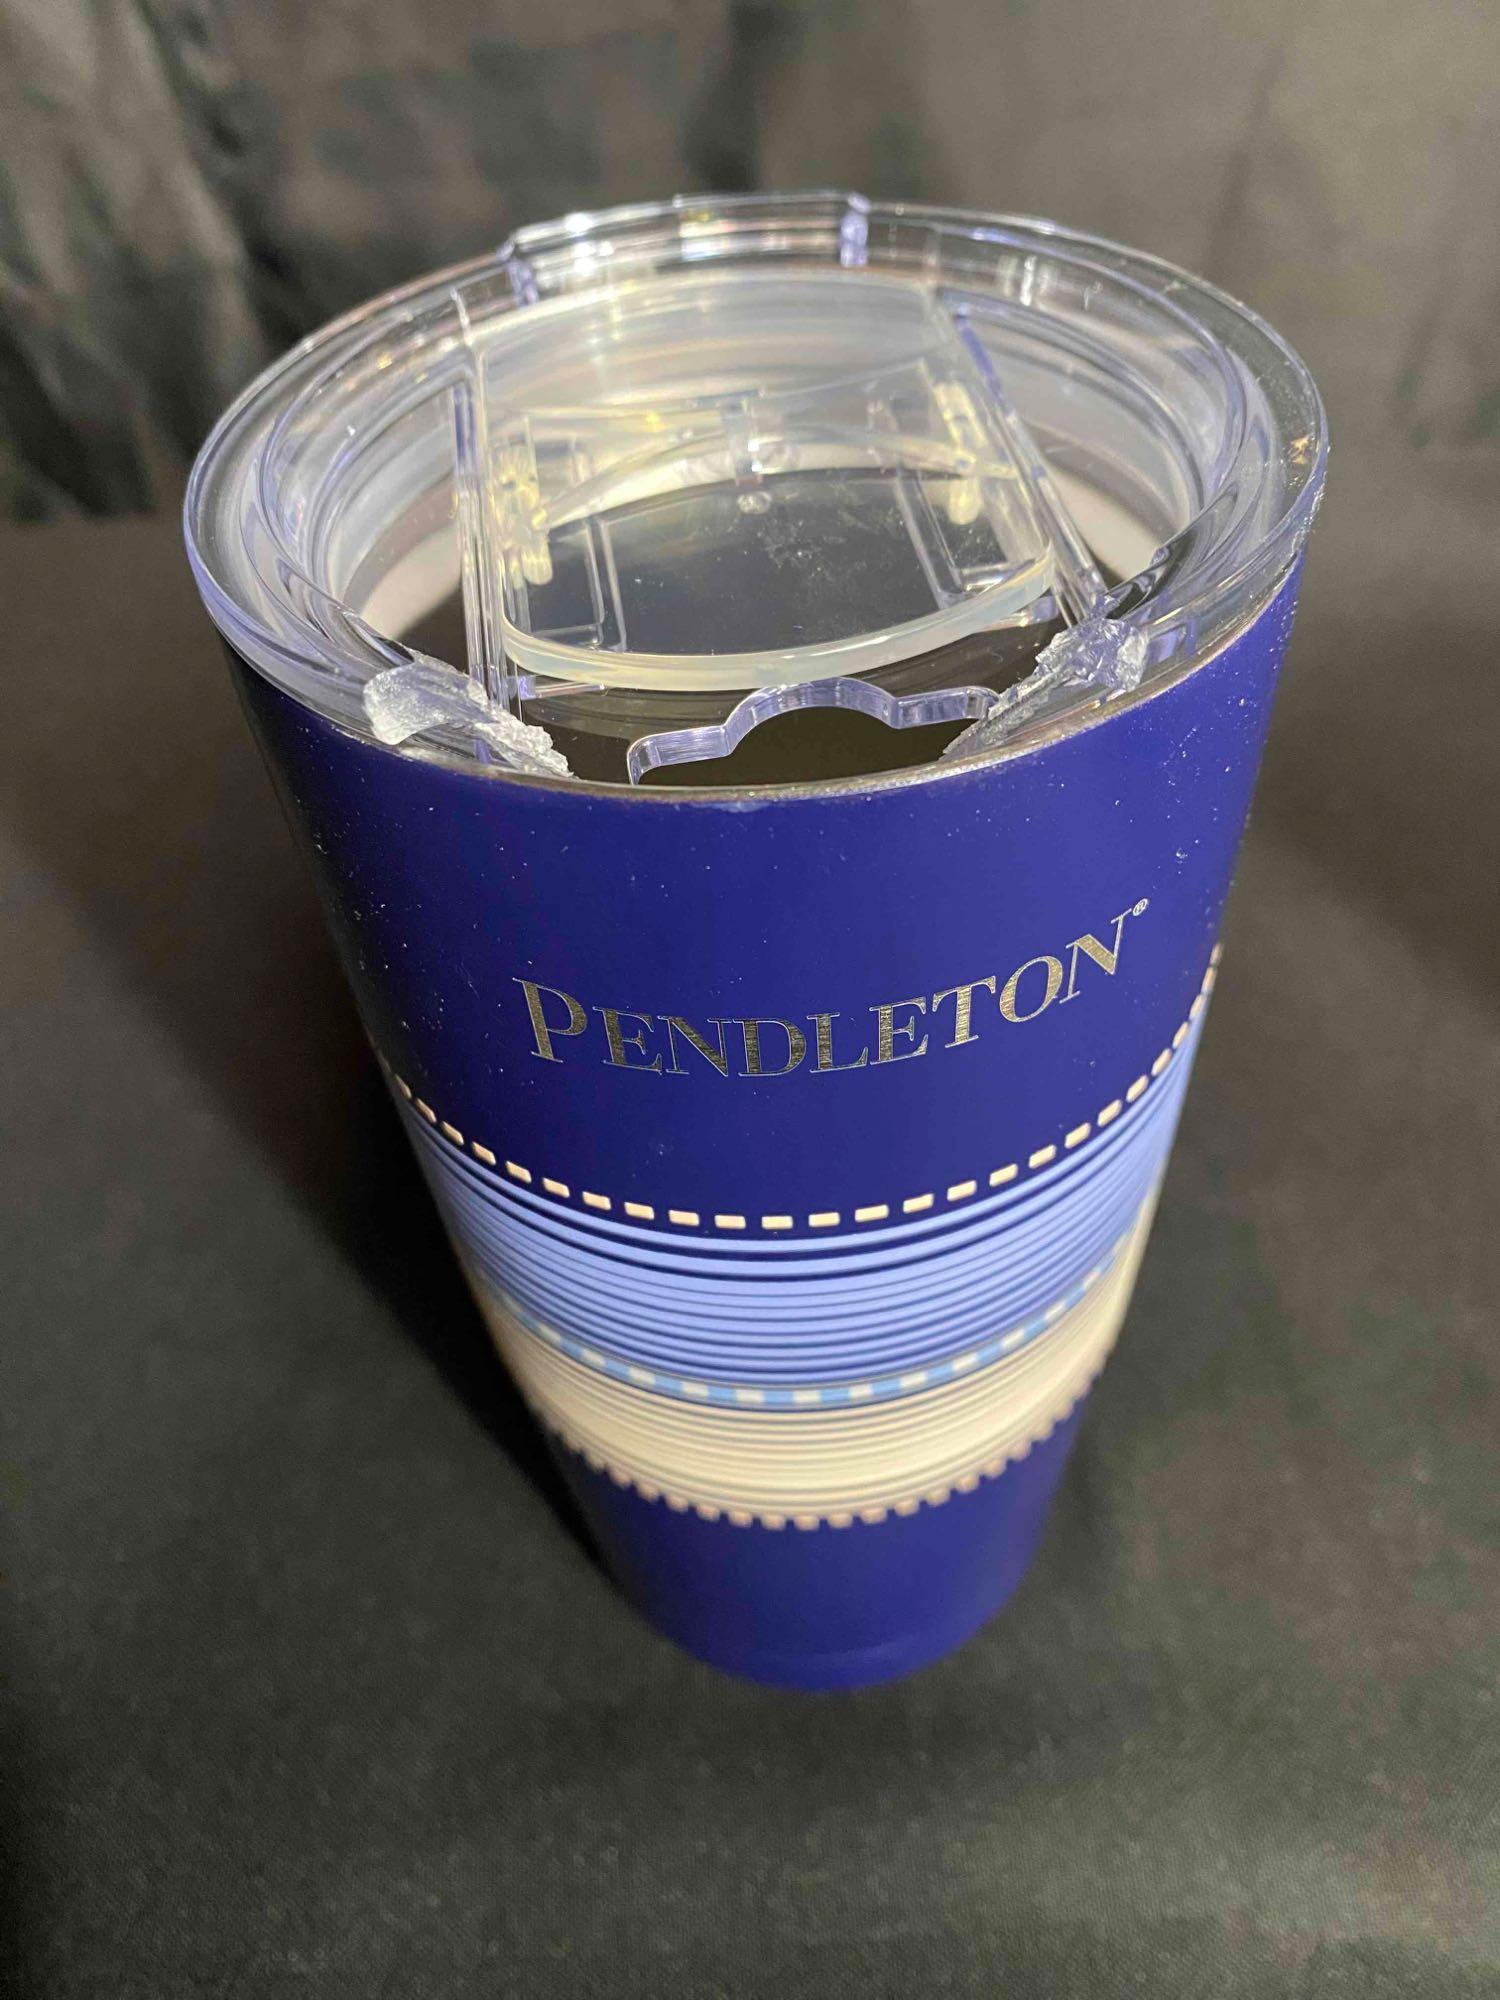 PENDLETON 2 Double Wall Vacuum Insulated Tumblers